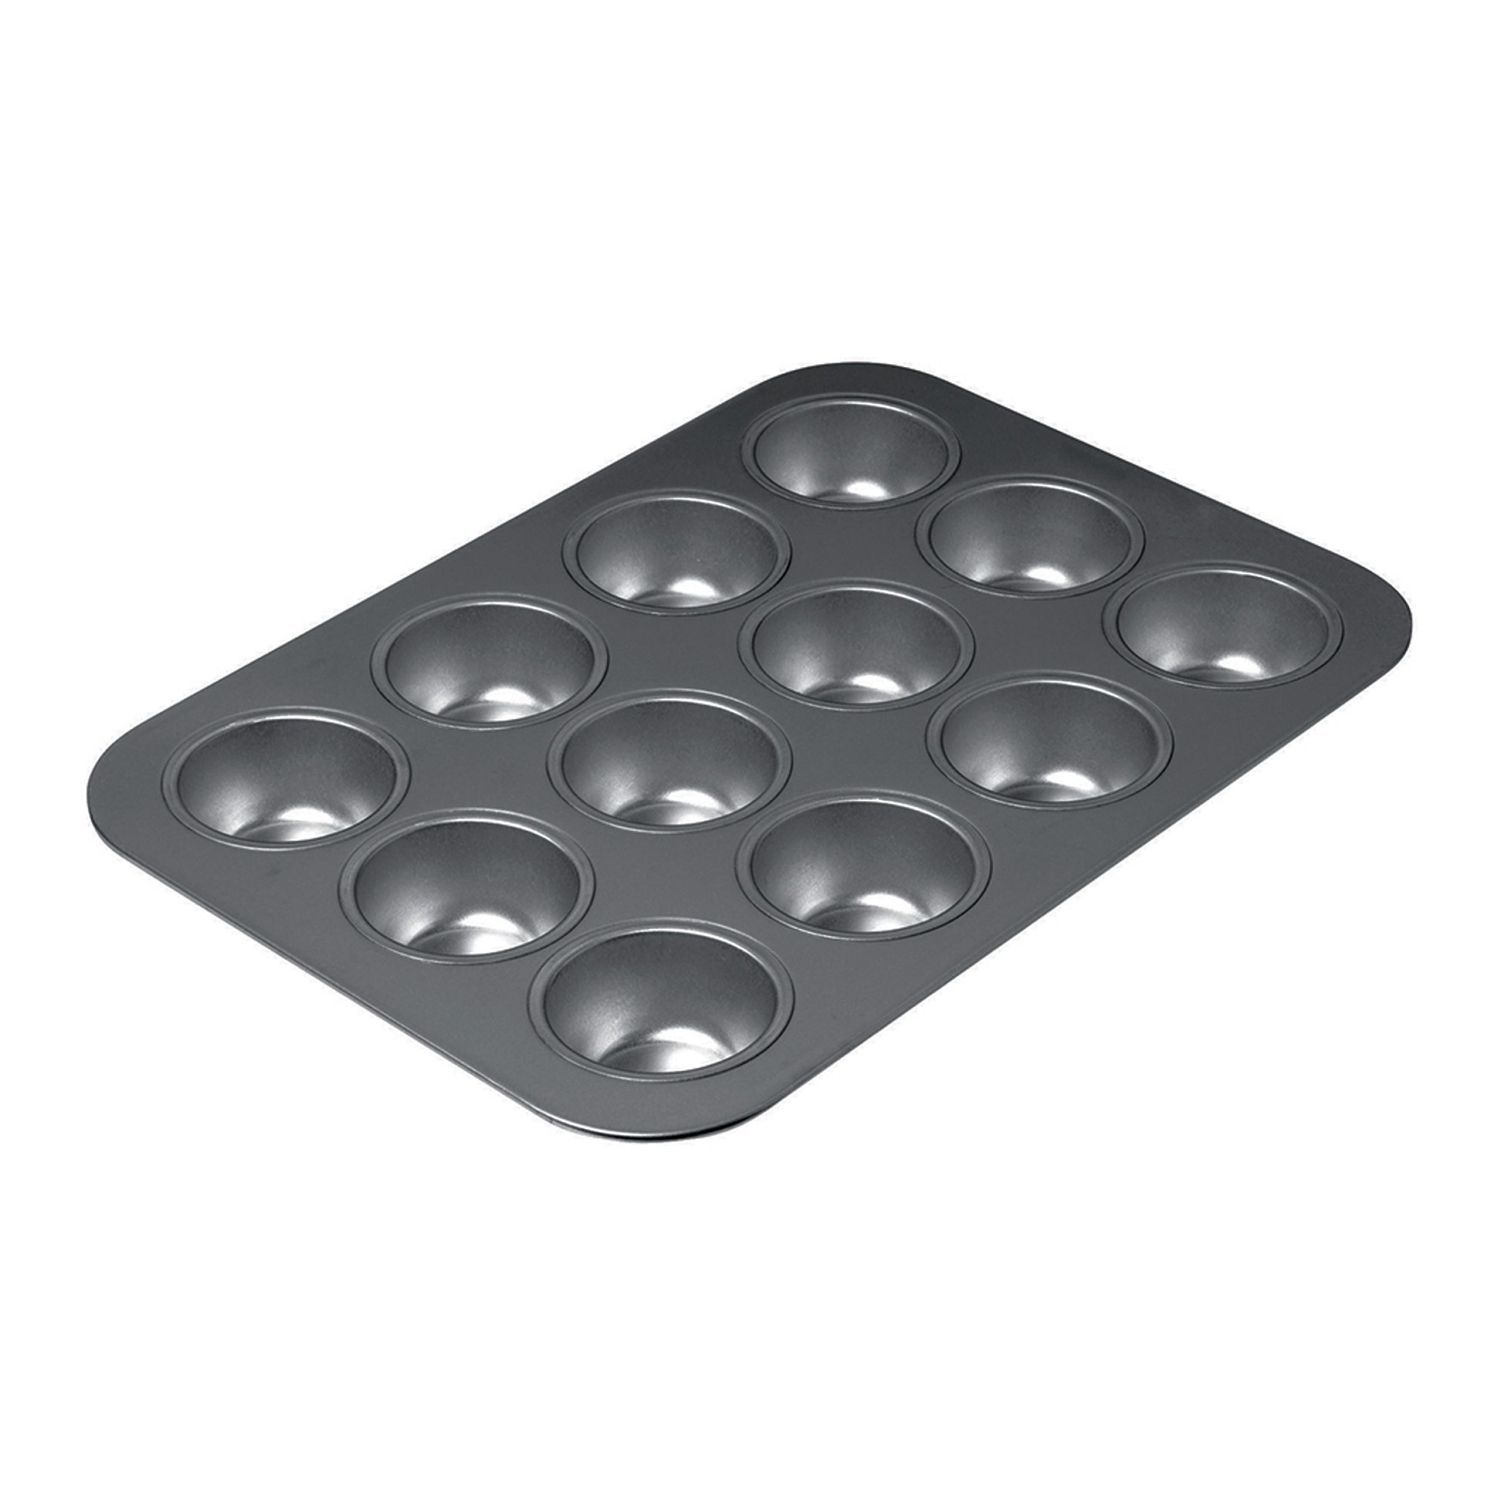 Baker's Secret Nonstick Carbon Steel Muffin Pan, 12 Cups, Gray, Size: 12cup